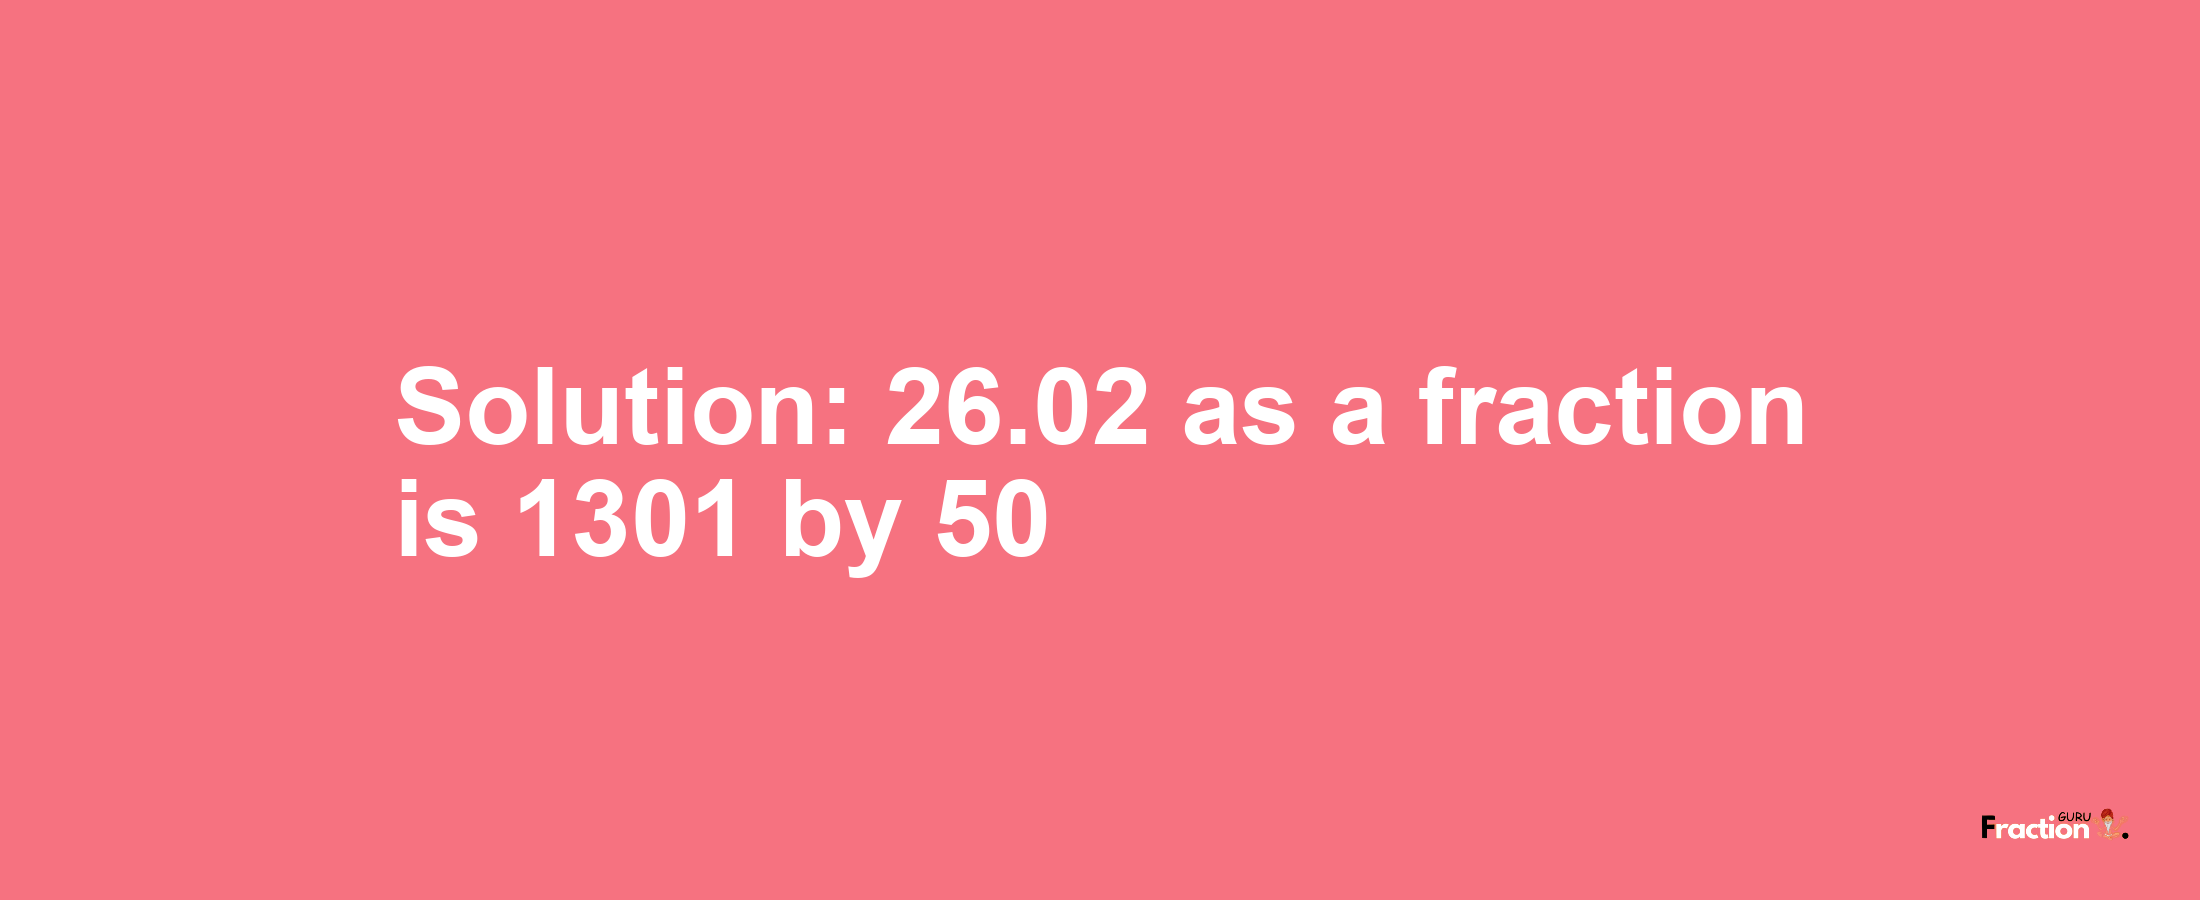 Solution:26.02 as a fraction is 1301/50